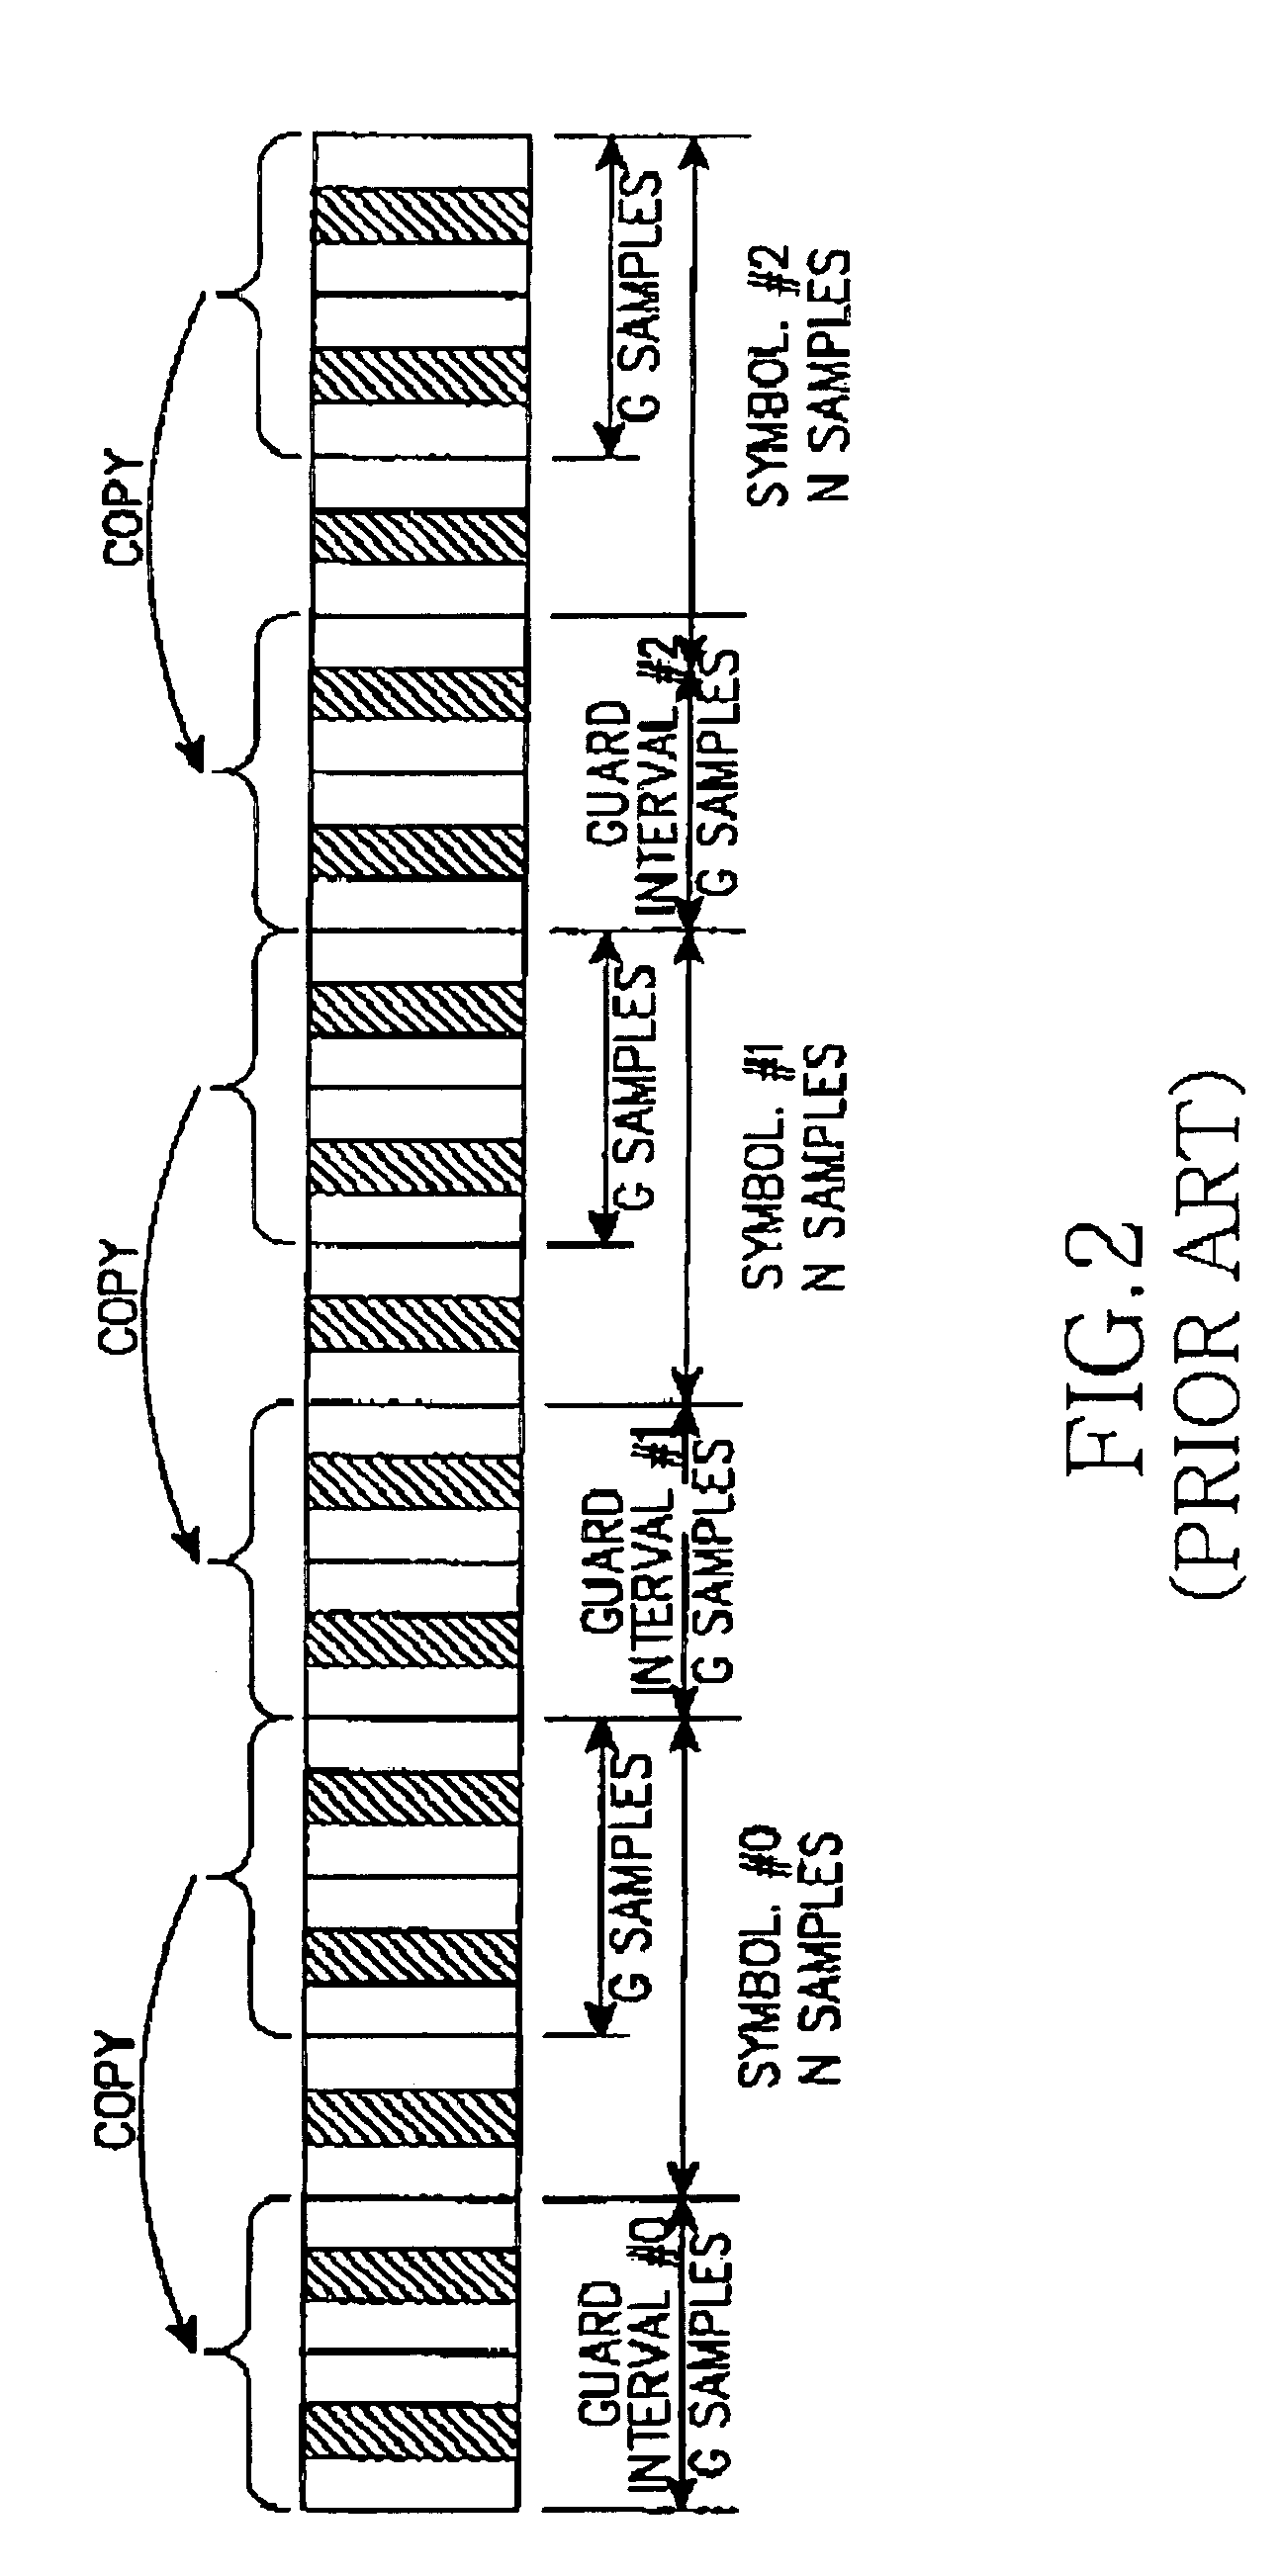 System and method for compensating timing error using pilot symbol in OFDM/CDMA communication system